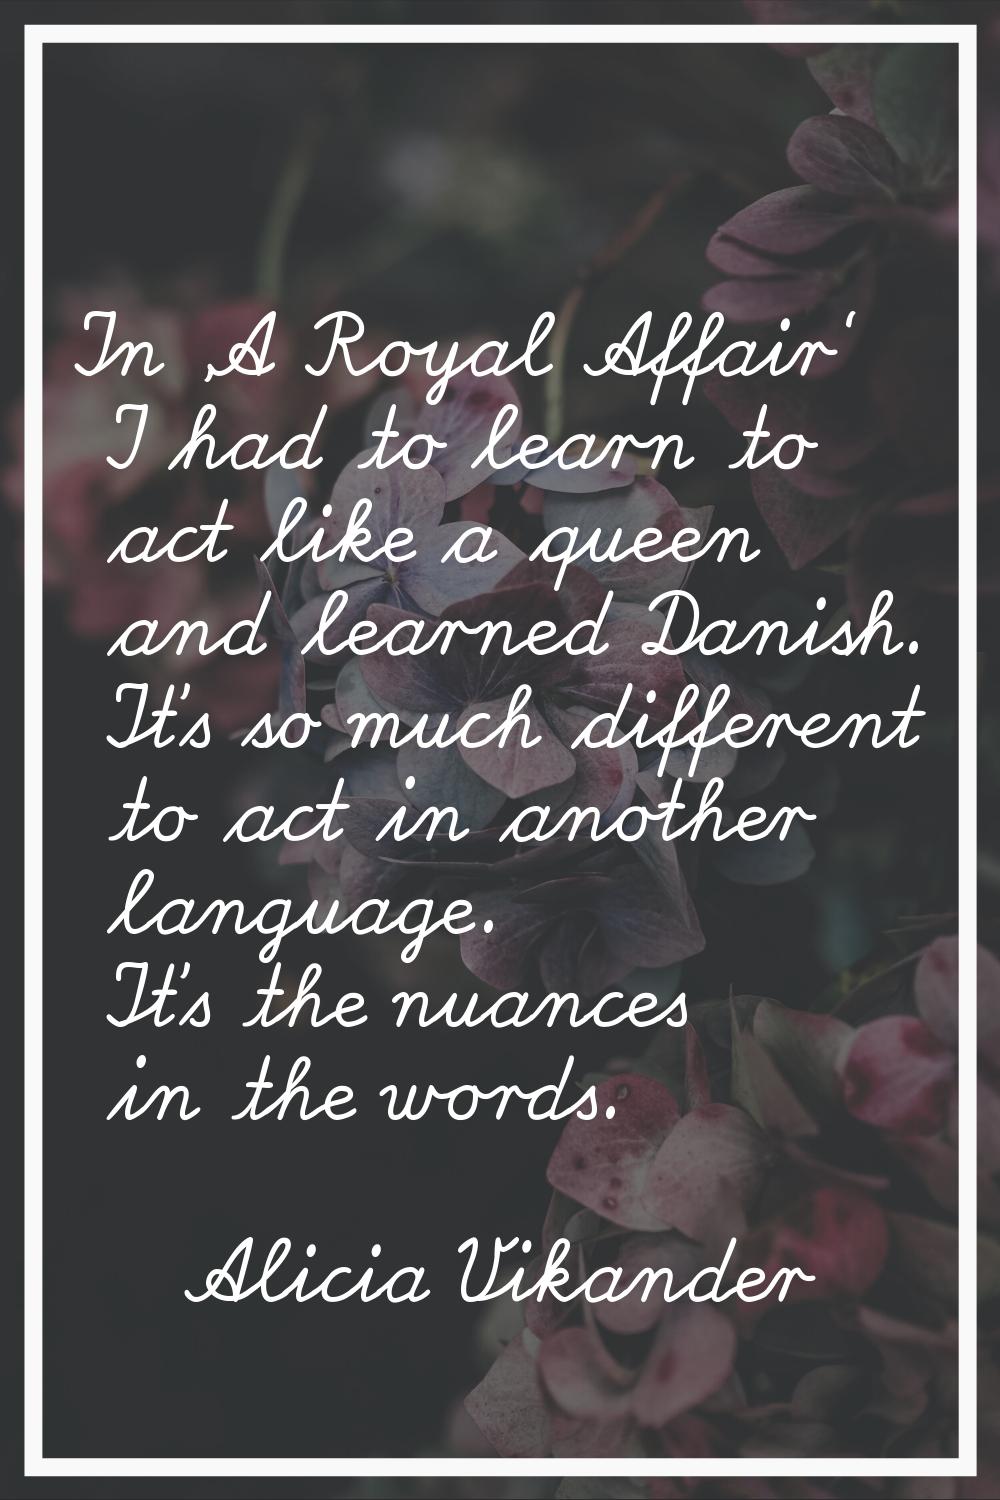 In 'A Royal Affair' I had to learn to act like a queen and learned Danish. It's so much different t